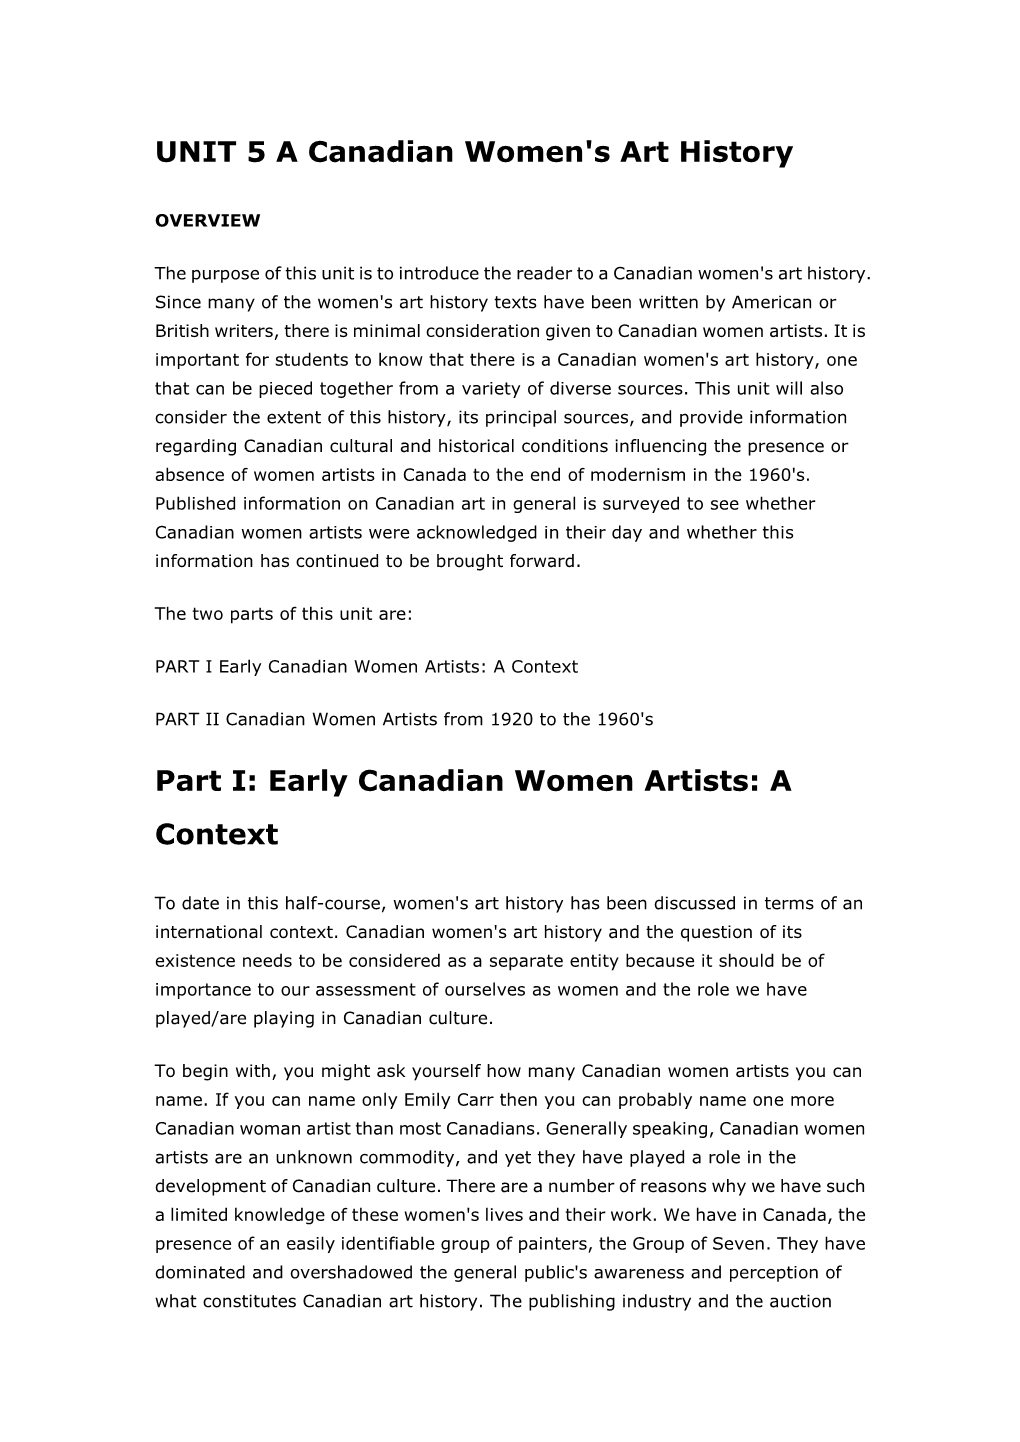 Early Canadian Women Artists: a Context